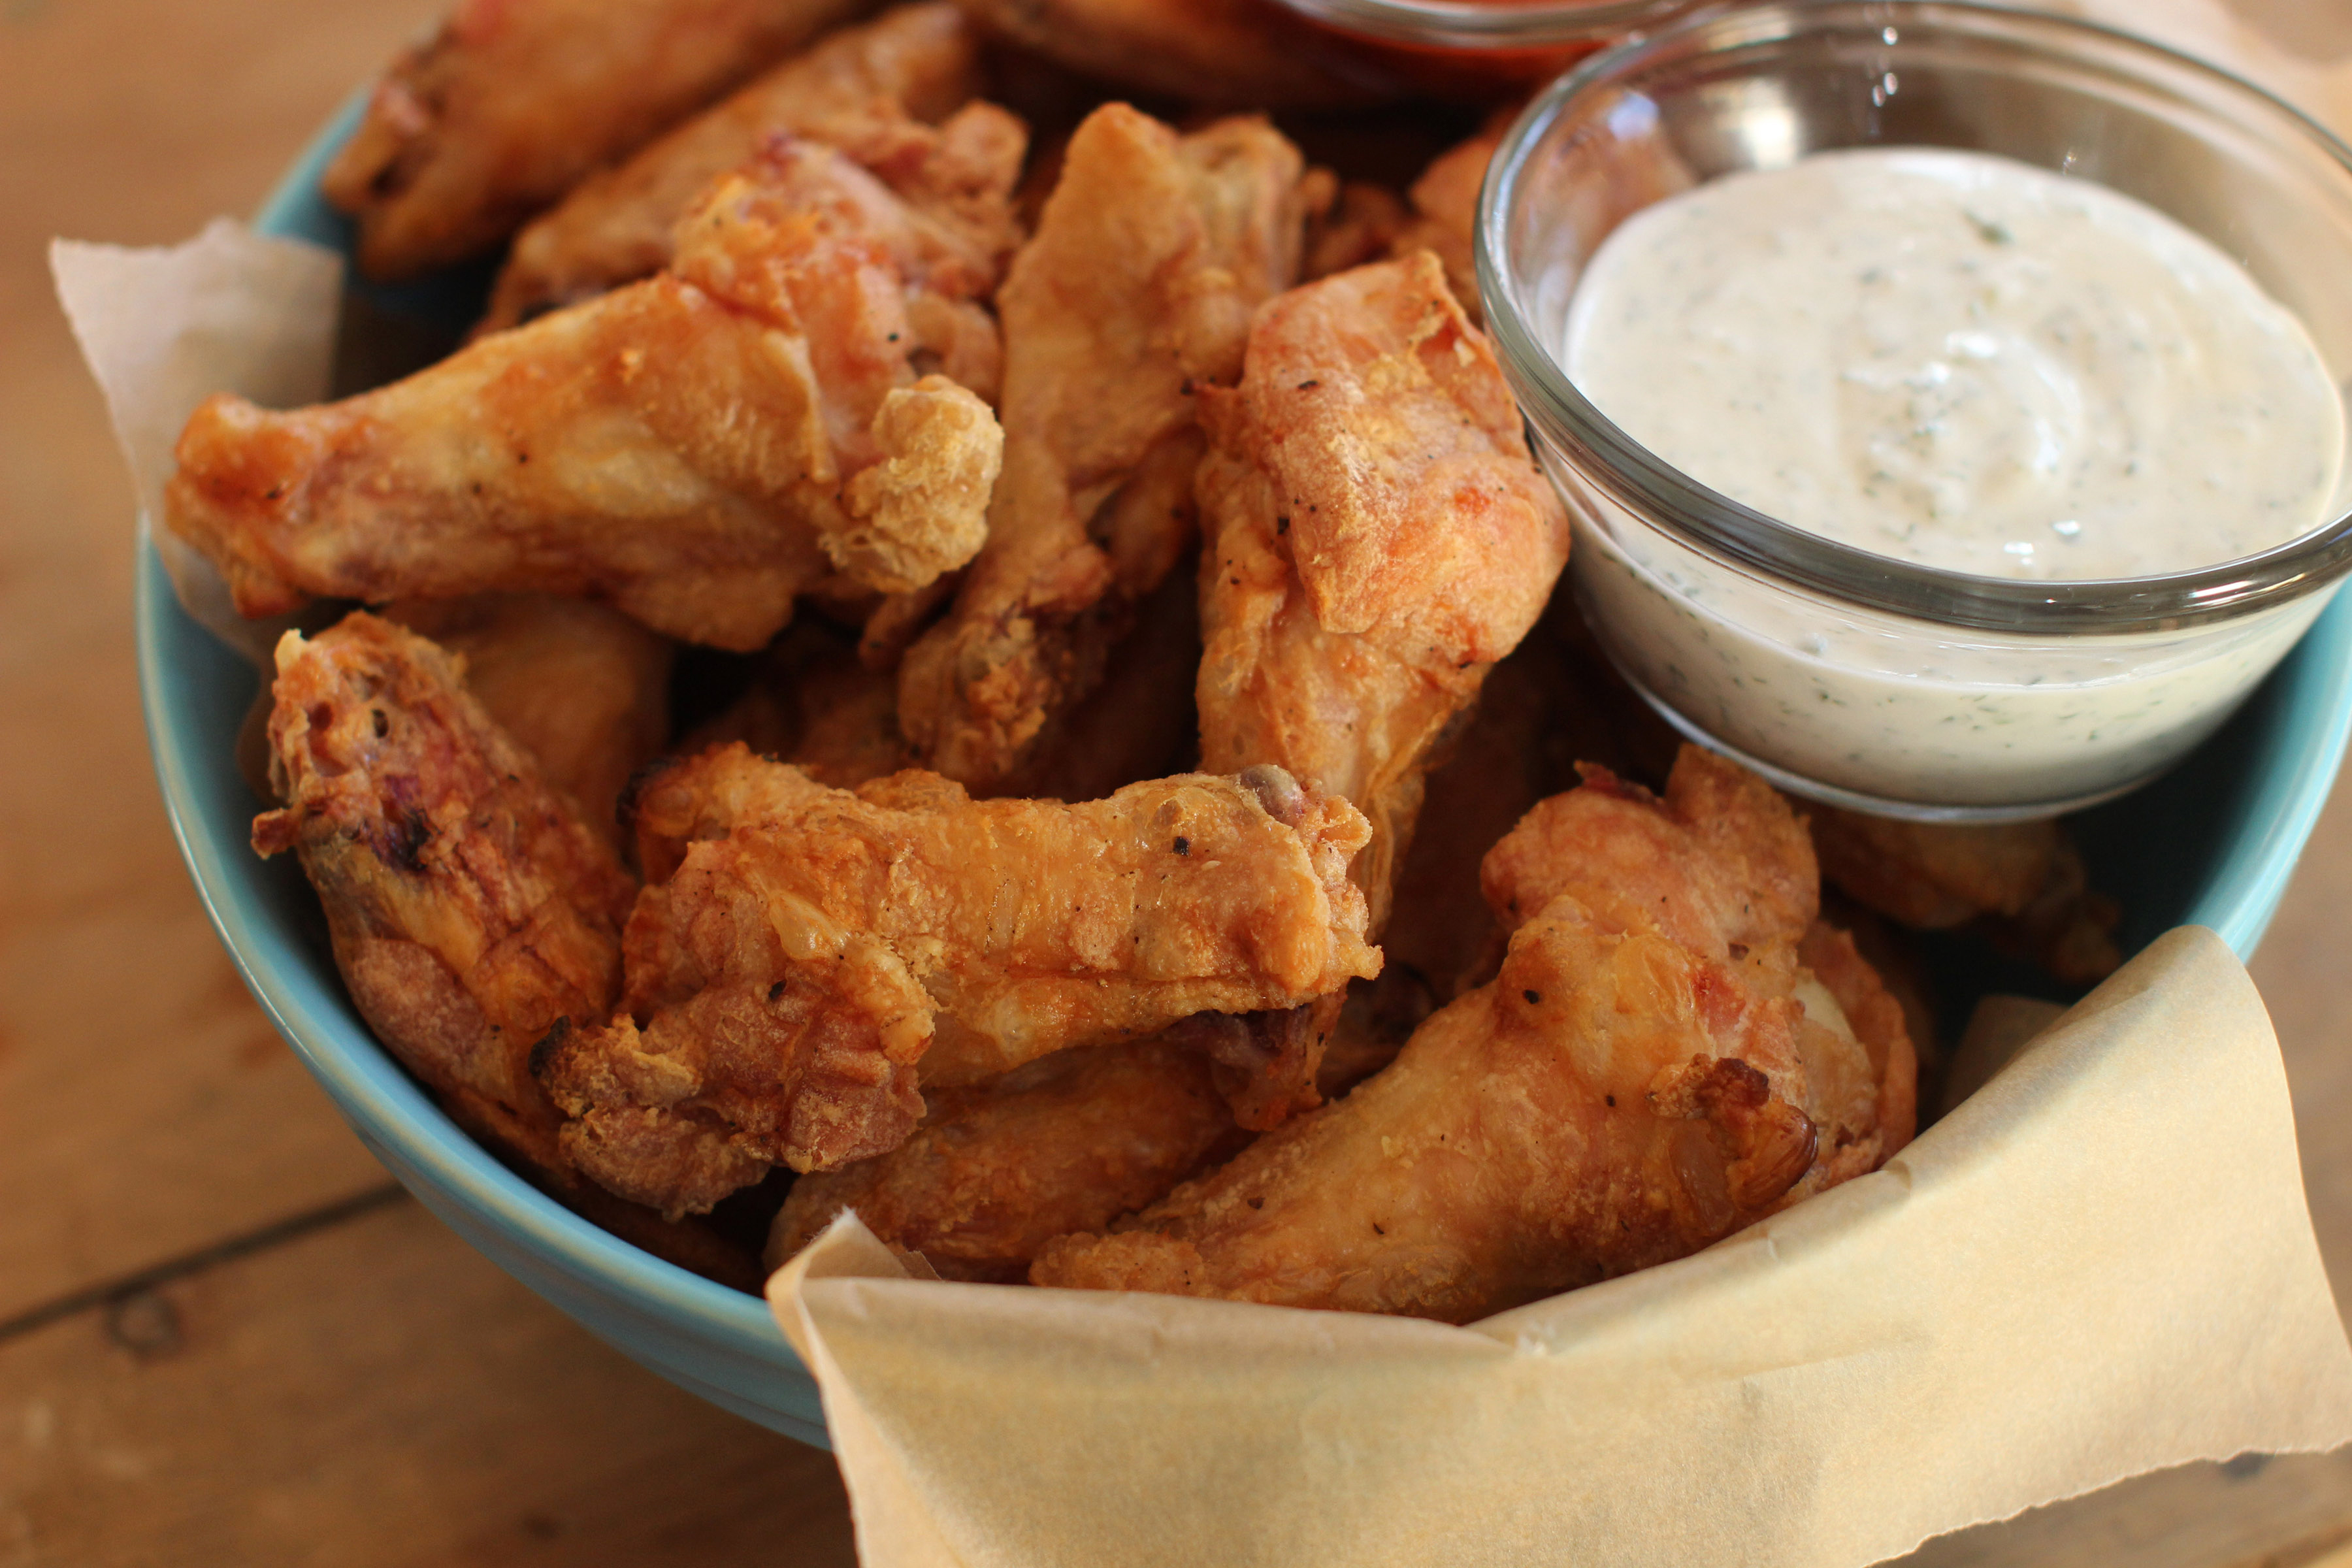 Americans will eat 1.35 billion chicken wings during Super Bowl